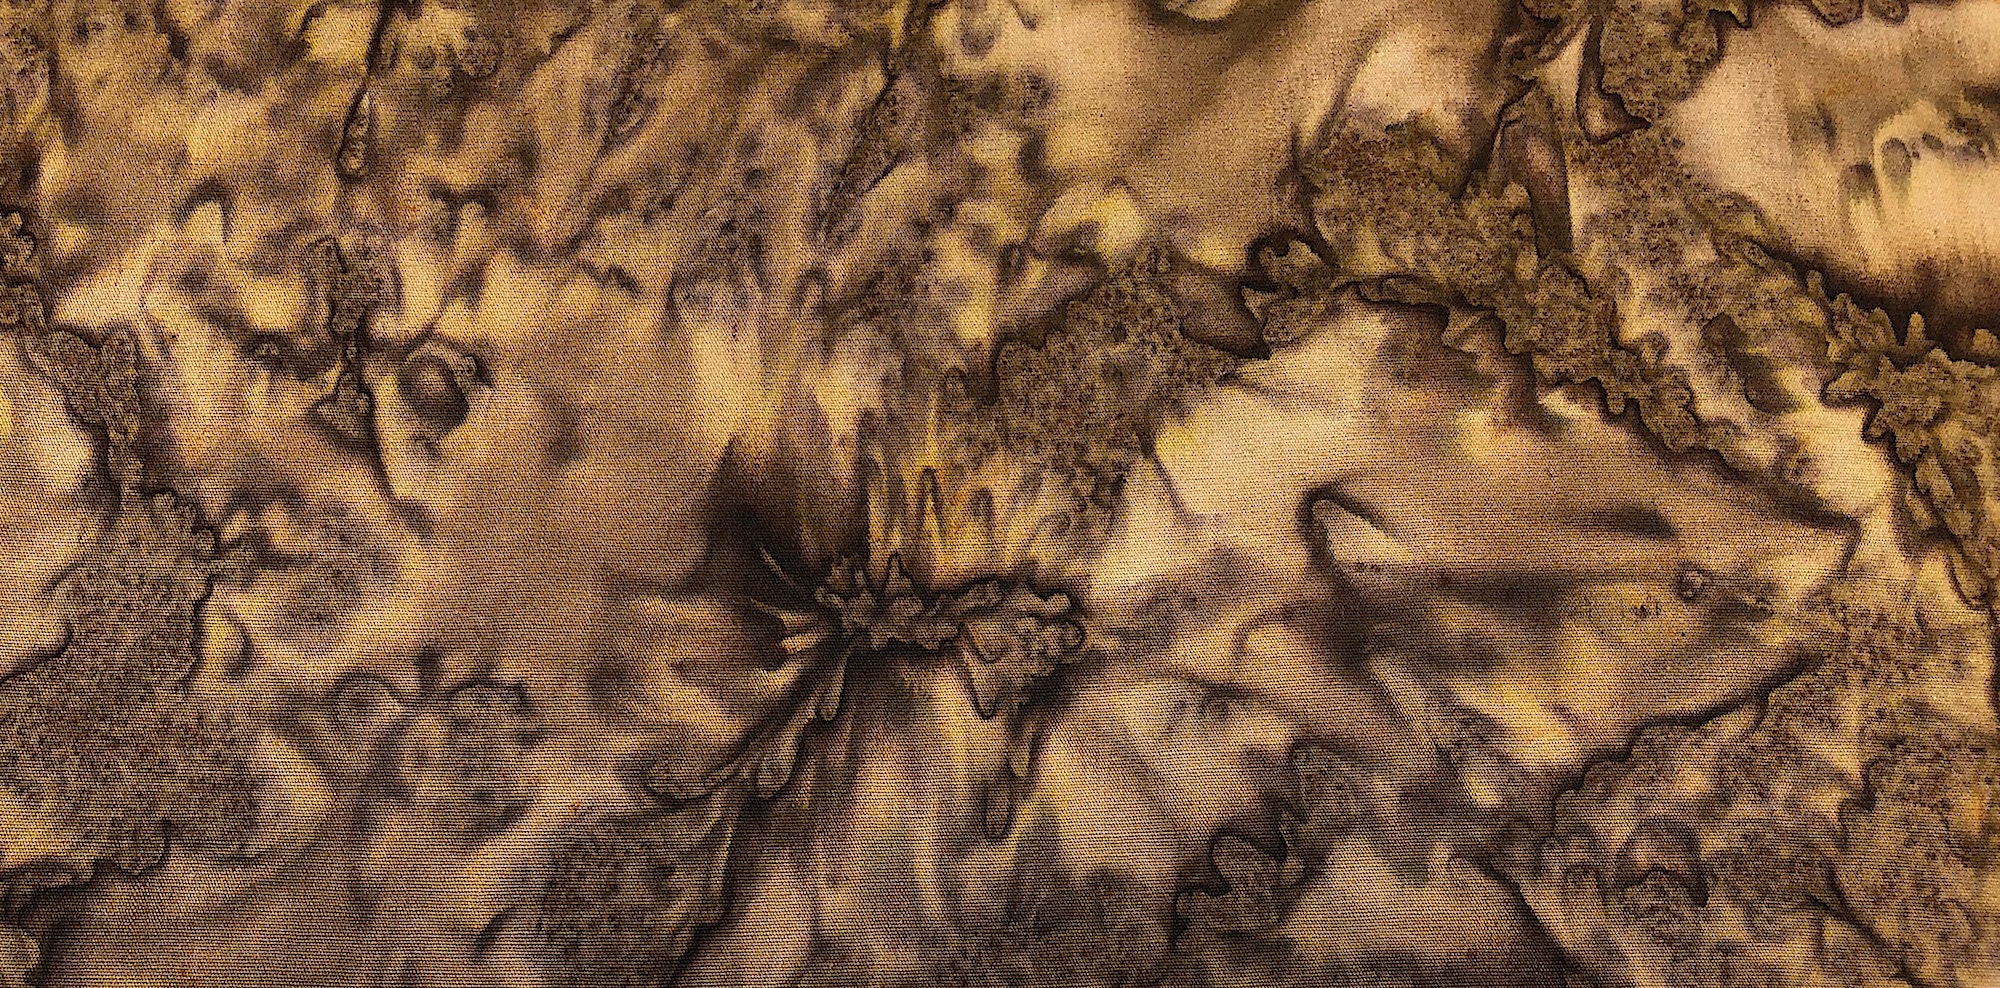 Cotton fabric covered in shades of brown and beige.